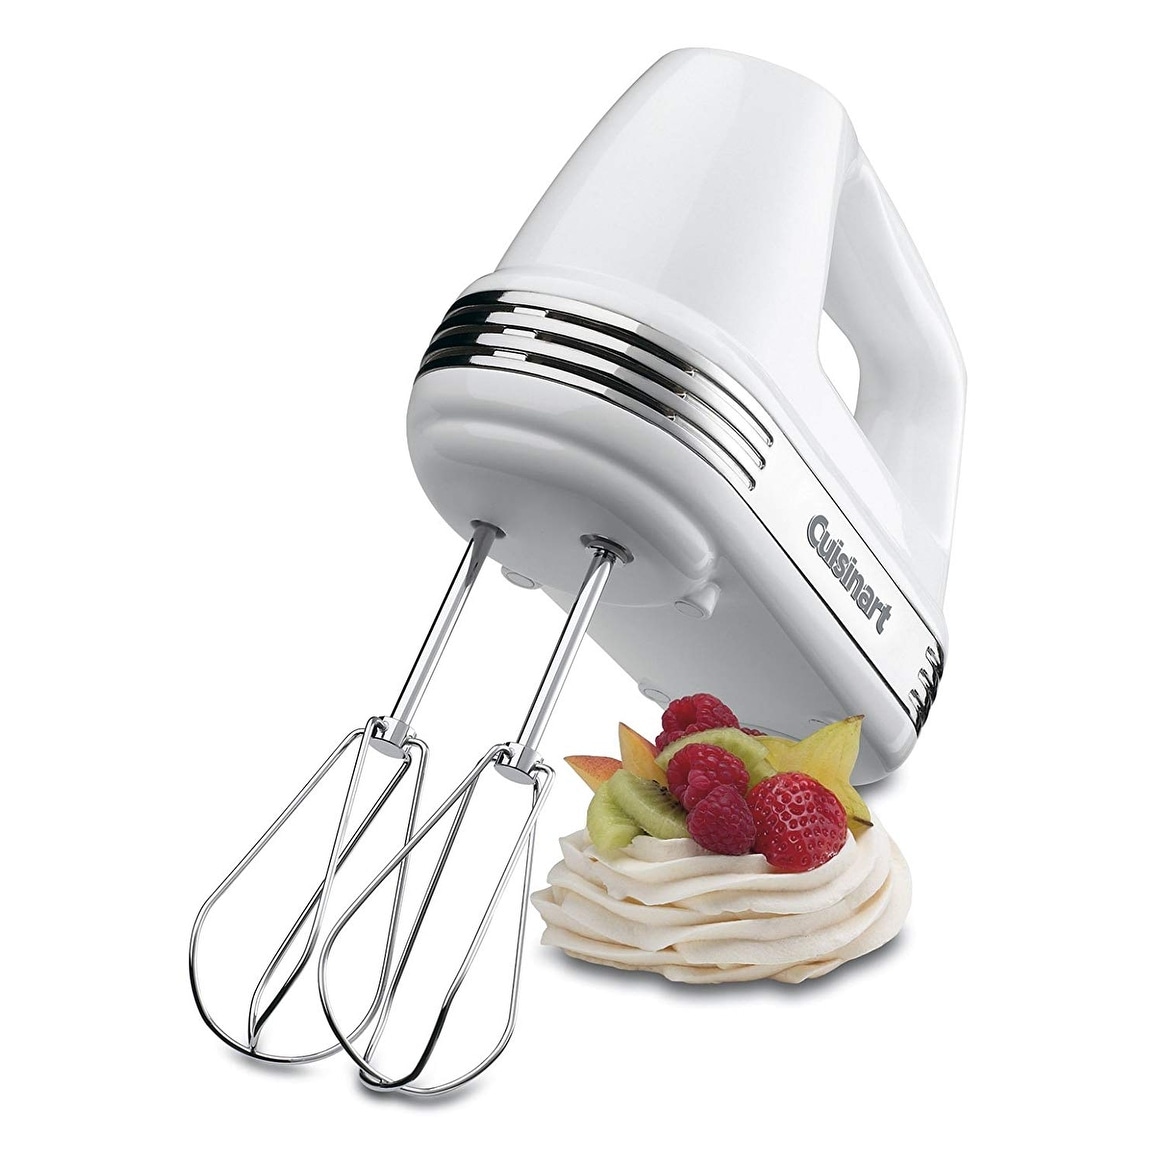 https://ak1.ostkcdn.com/images/products/is/images/direct/9c859842727404f40516337044aebb3f077fbe43/Cuisinart-HM-70-Power-Advantage-7-Speed-Hand-Mixer%2C-Stainless-and-White.jpg